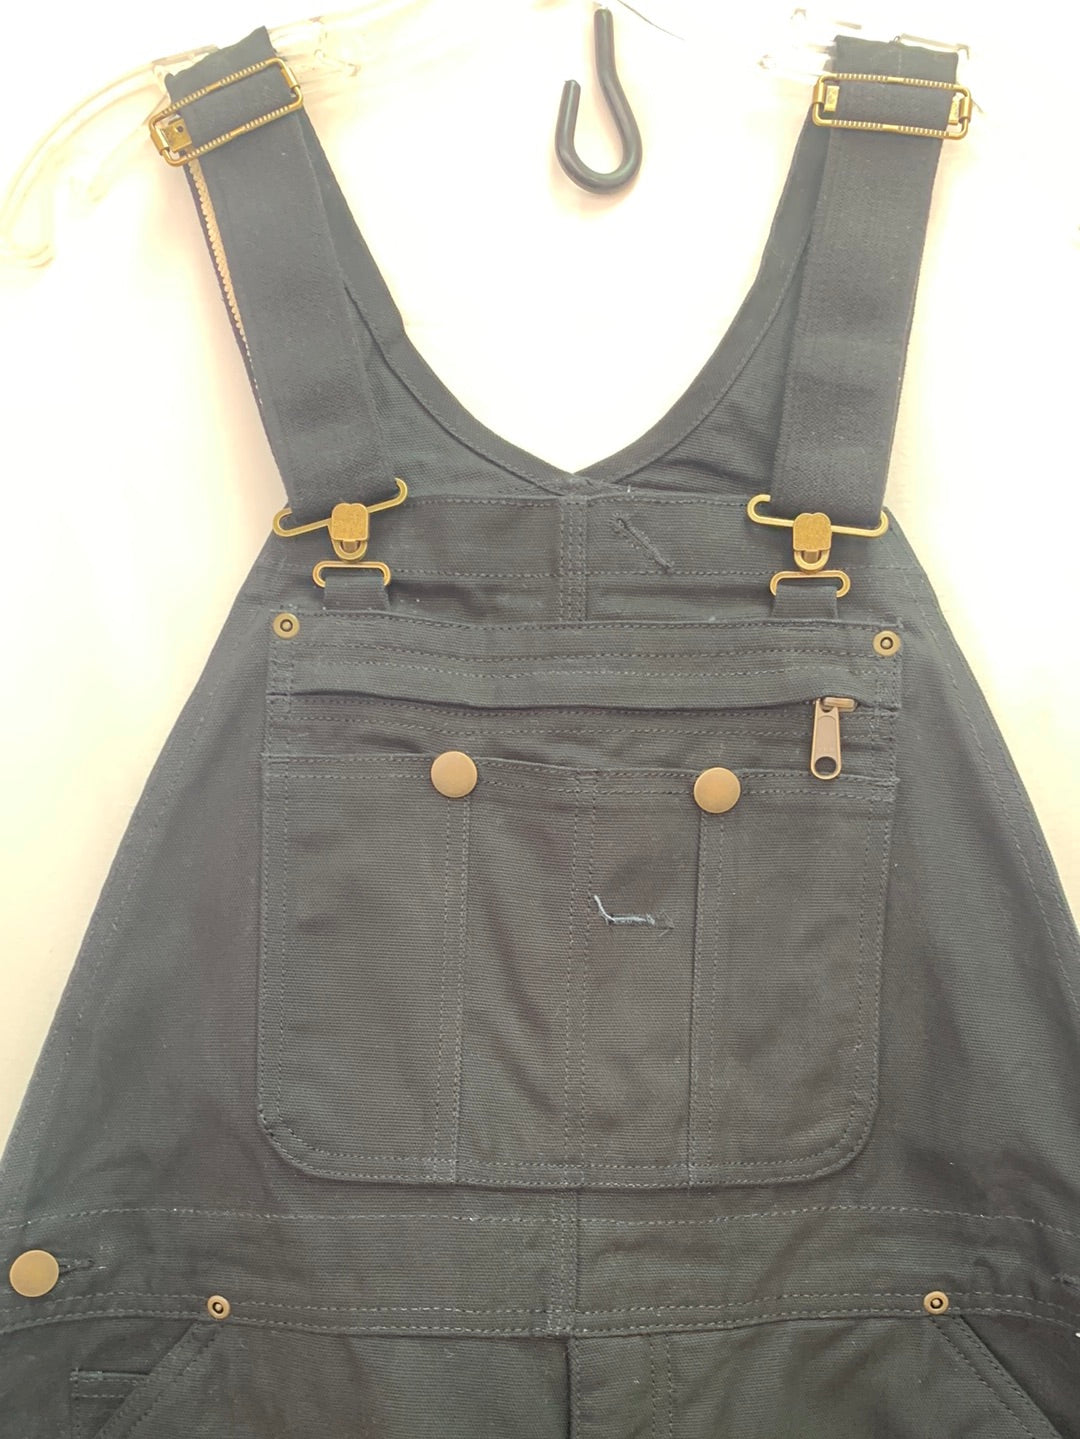 NWT - AMAZON ESSENTIALS black Canvas Lined Overall - 33W x 32L